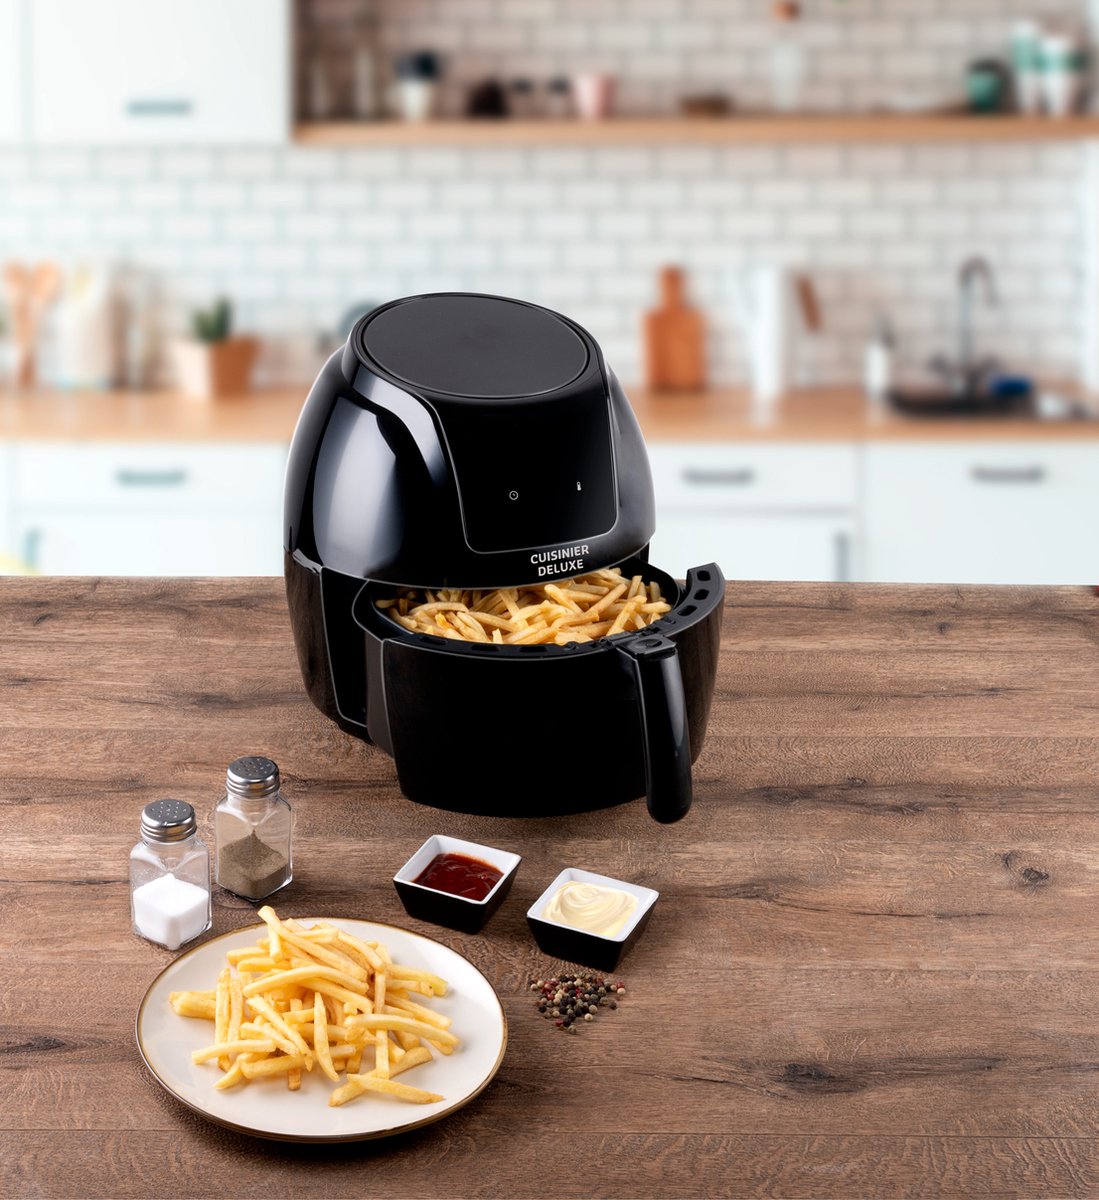 cooks-2-5l-air-fryer-only-24-99-after-jcpenney-rebate